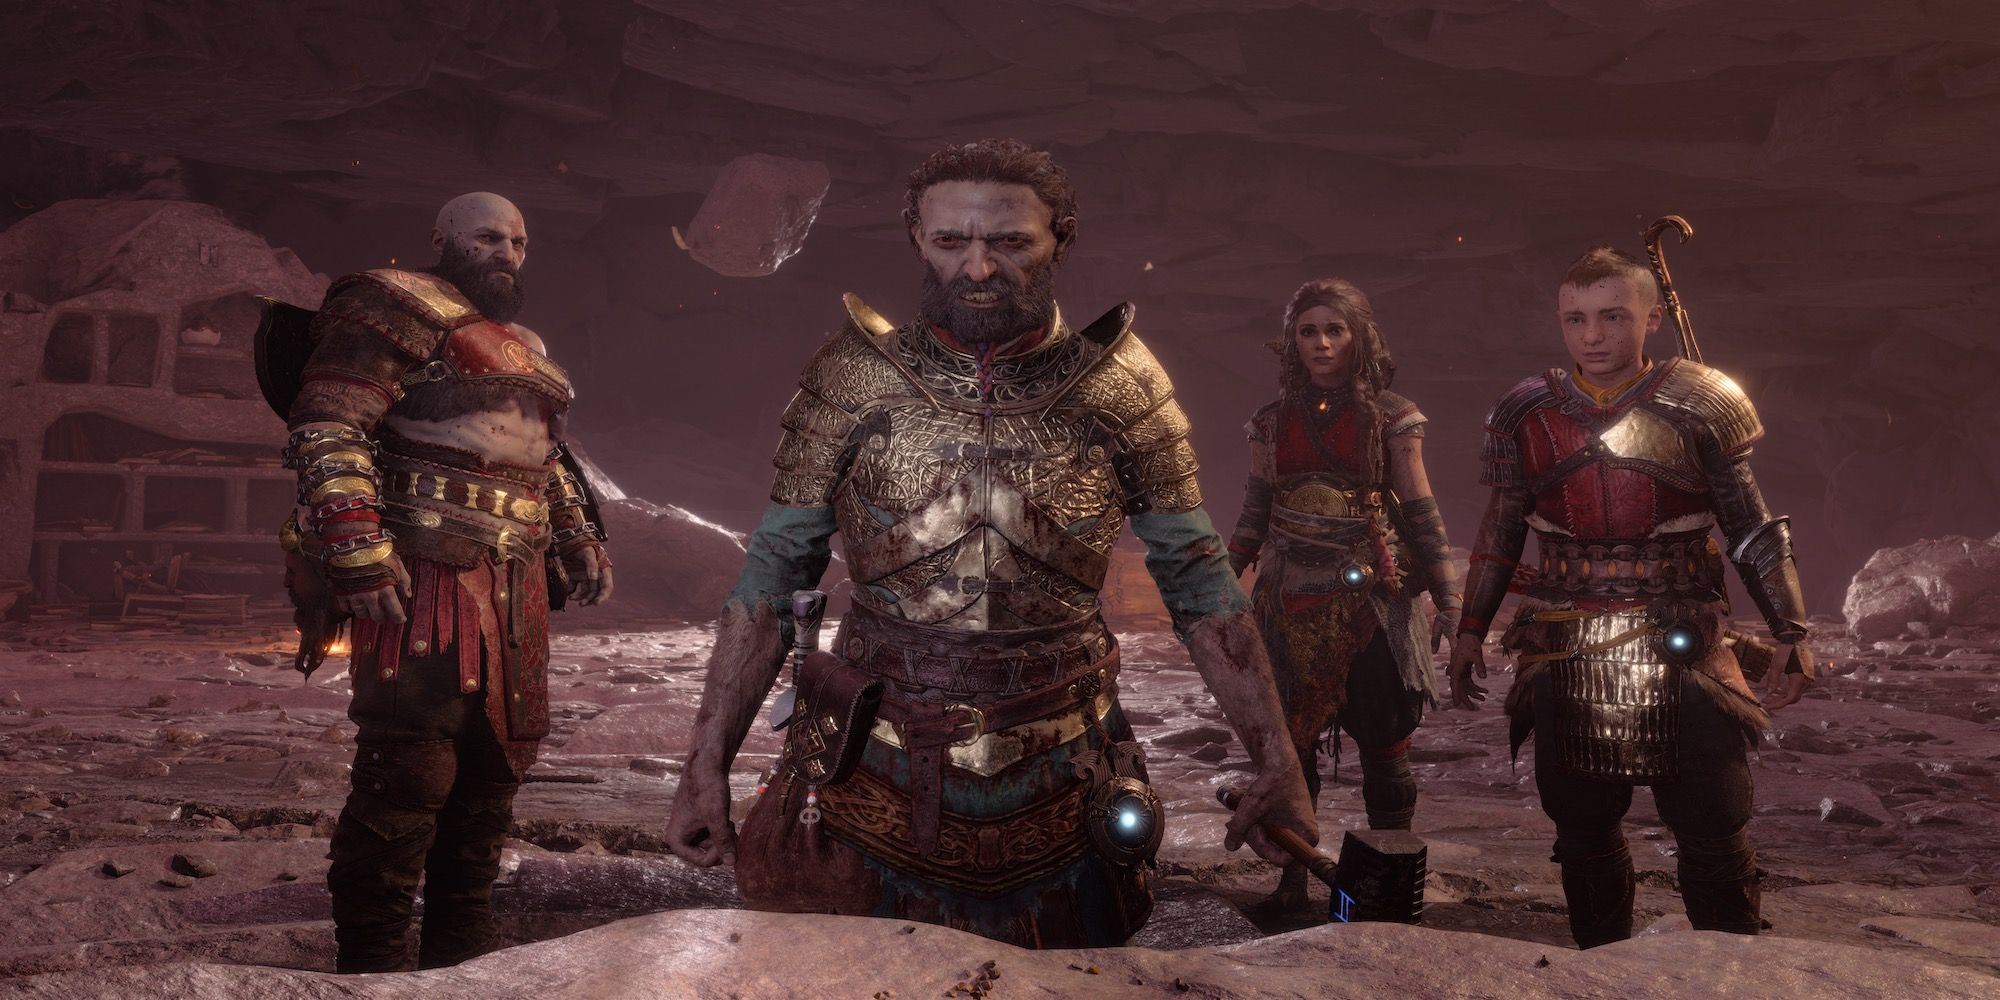 A movie scene with characters in God of War Ragnarok